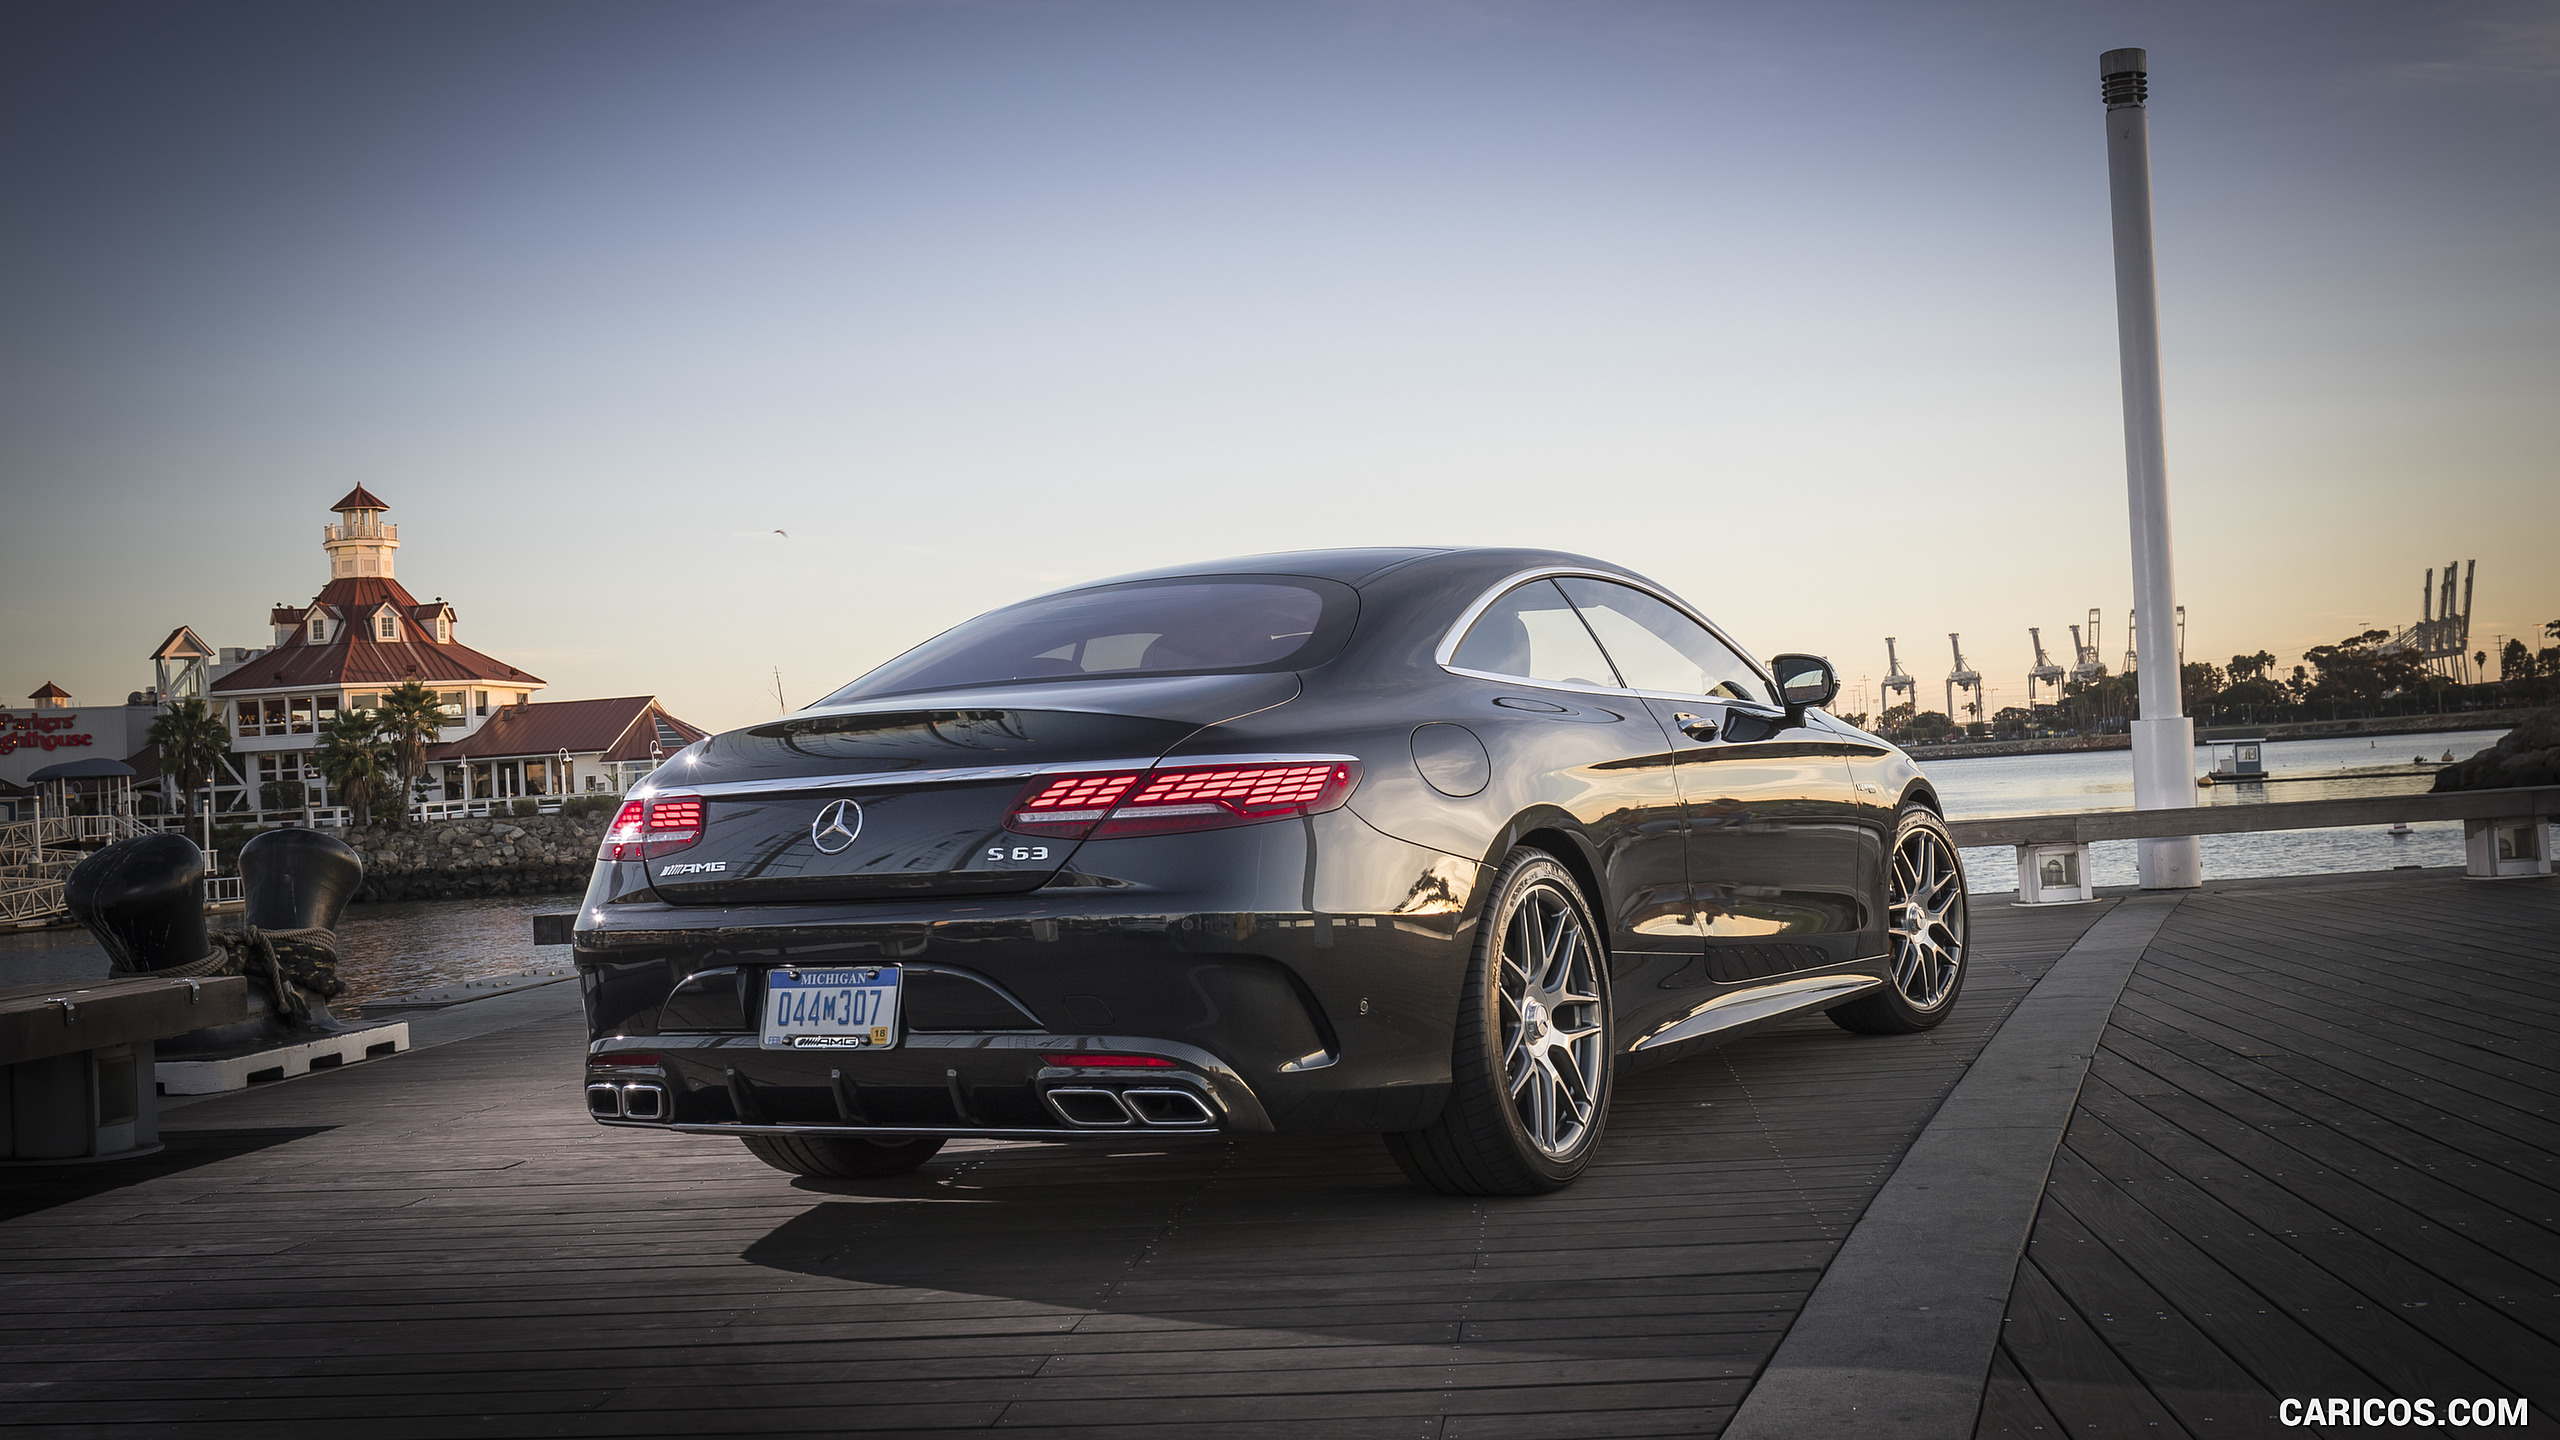 2018 Mercedes-AMG S63 Coupe (US-Spec) - Rear Three-Quarter, #62 of 98